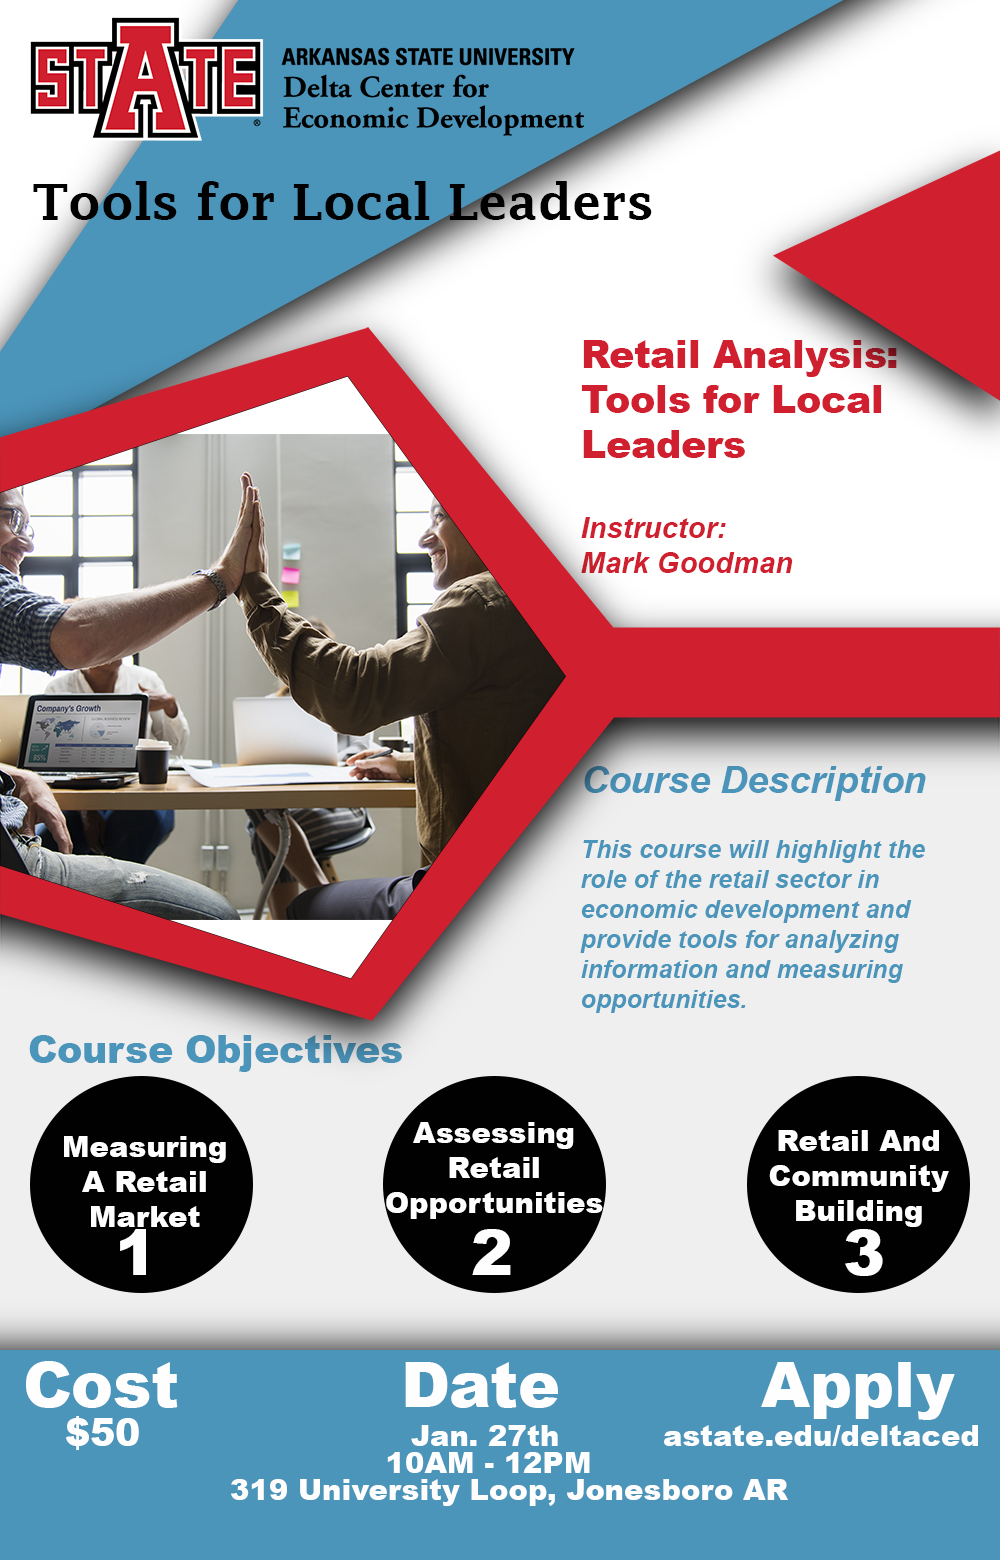 Retail Analysis, Tools for Local Leaders on January 27th at 10 a.m.